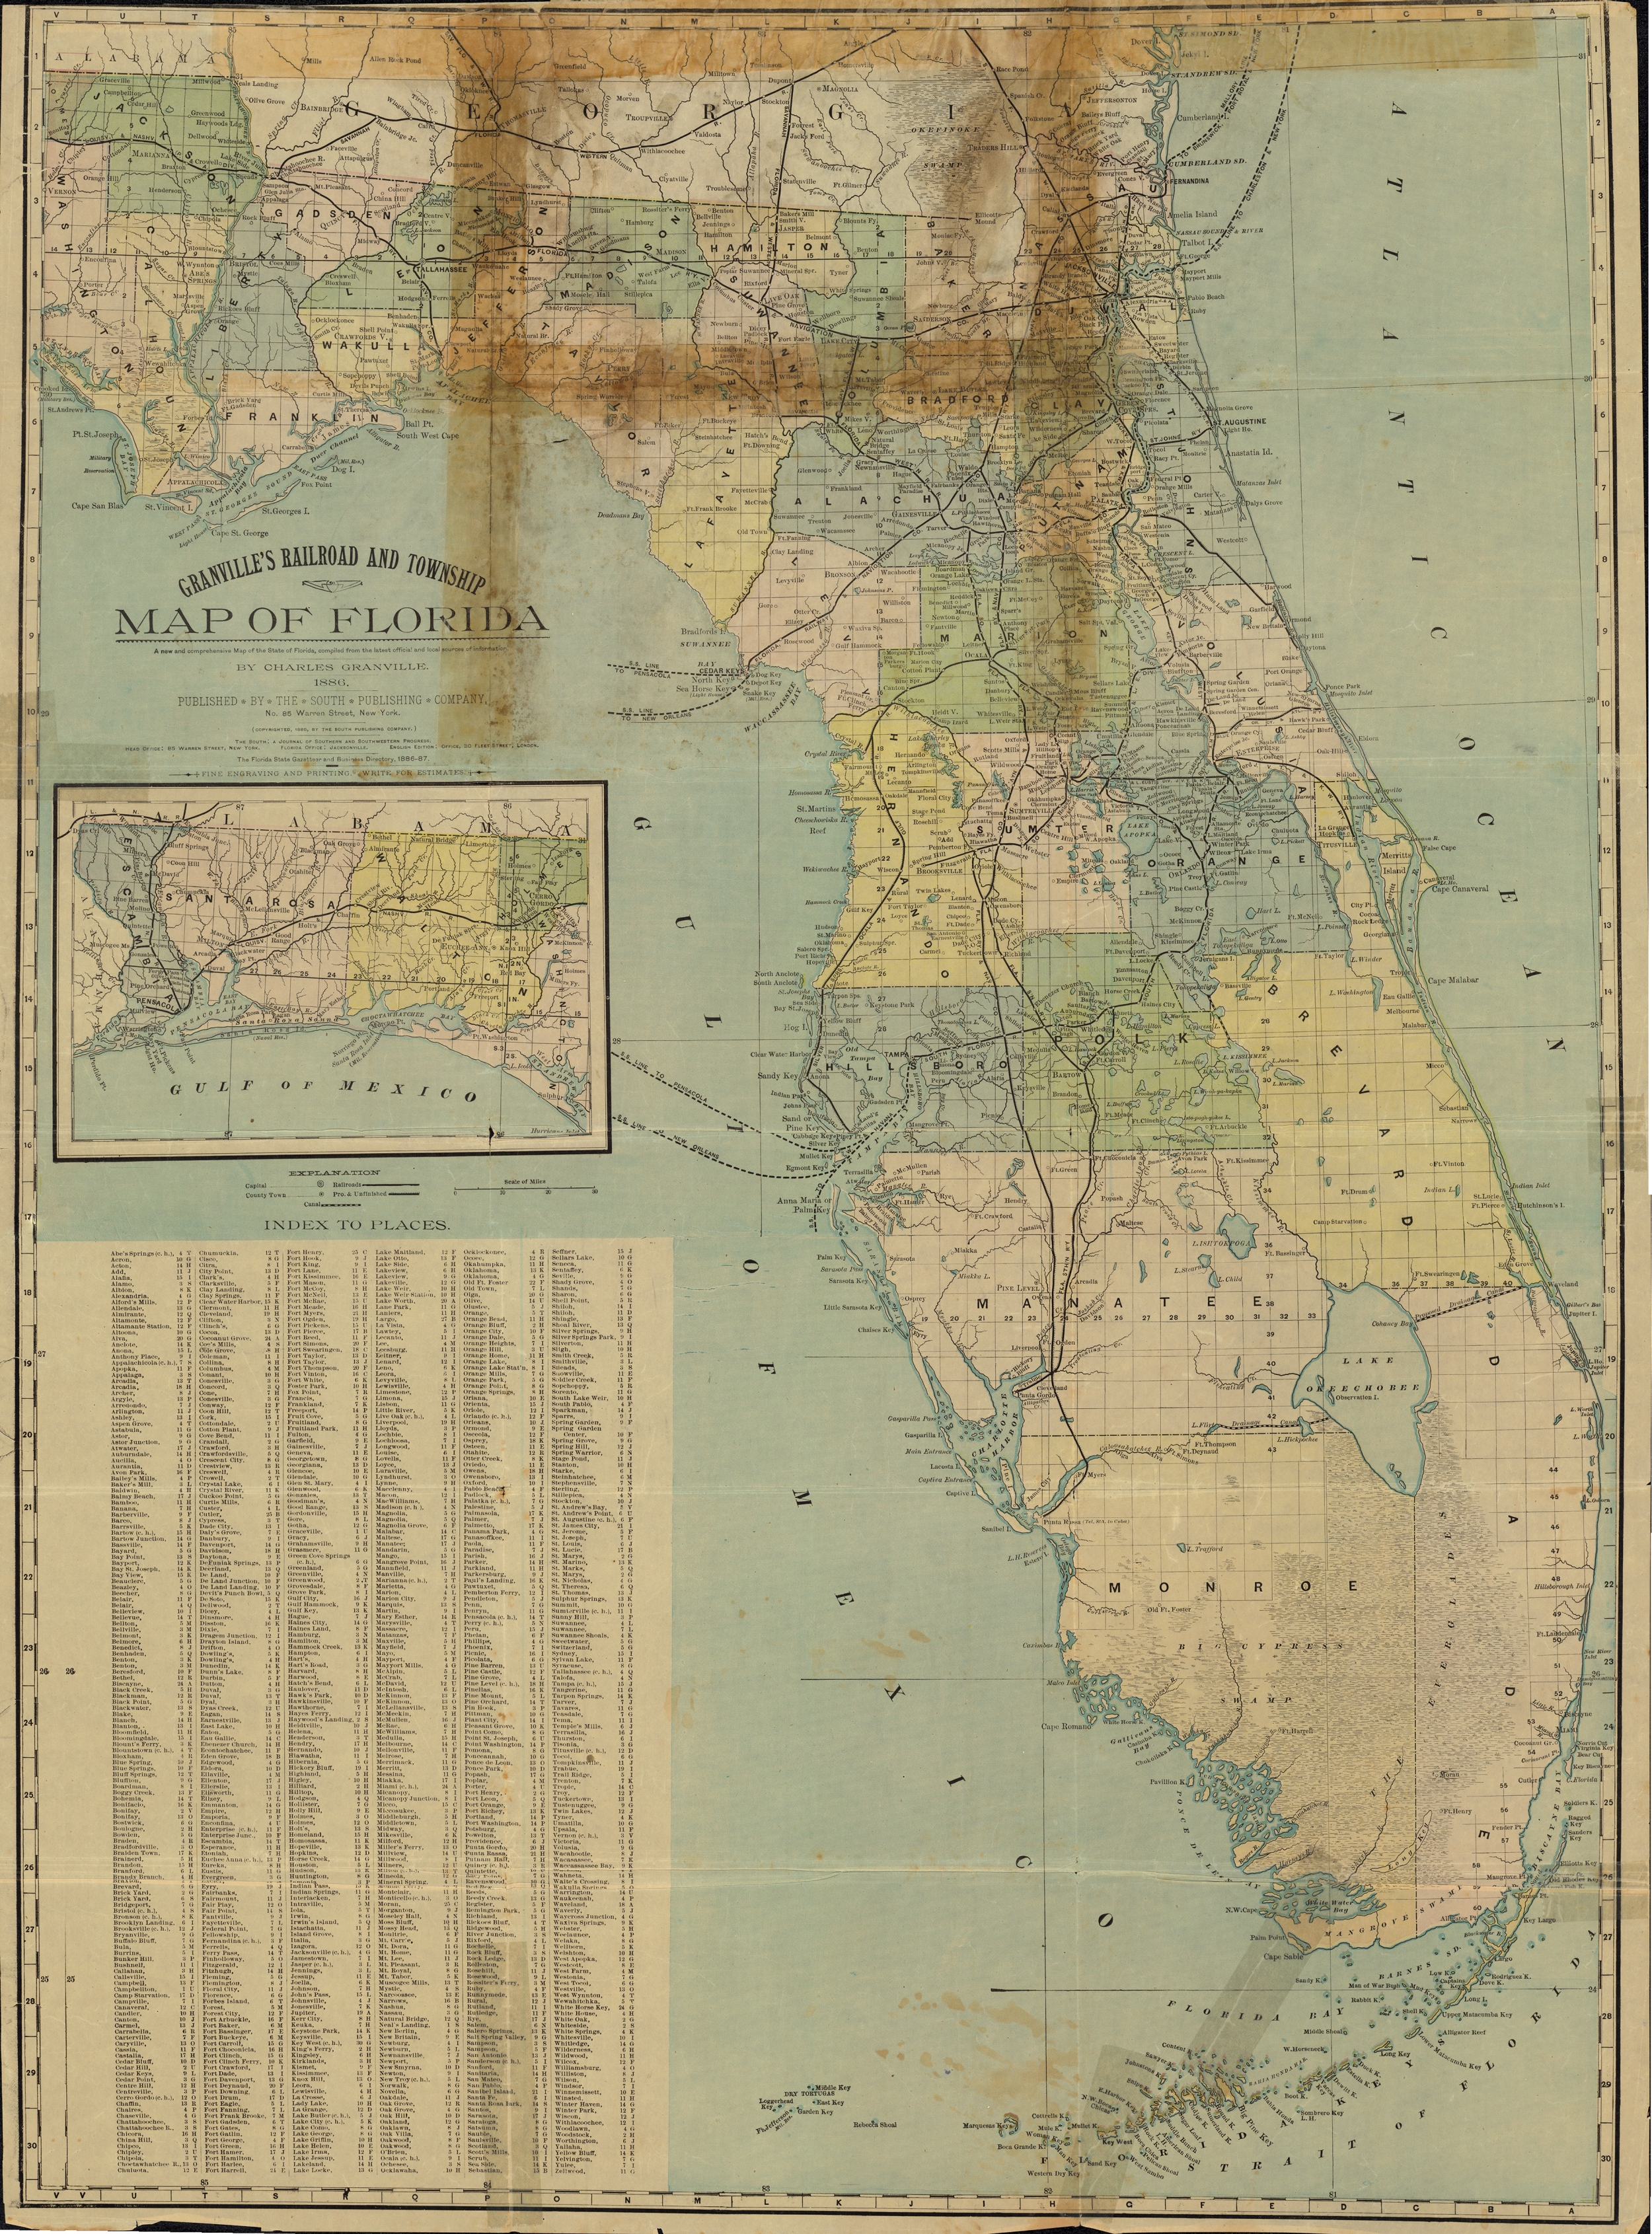 Granville's Railroad and Township Map of Florida, 1886